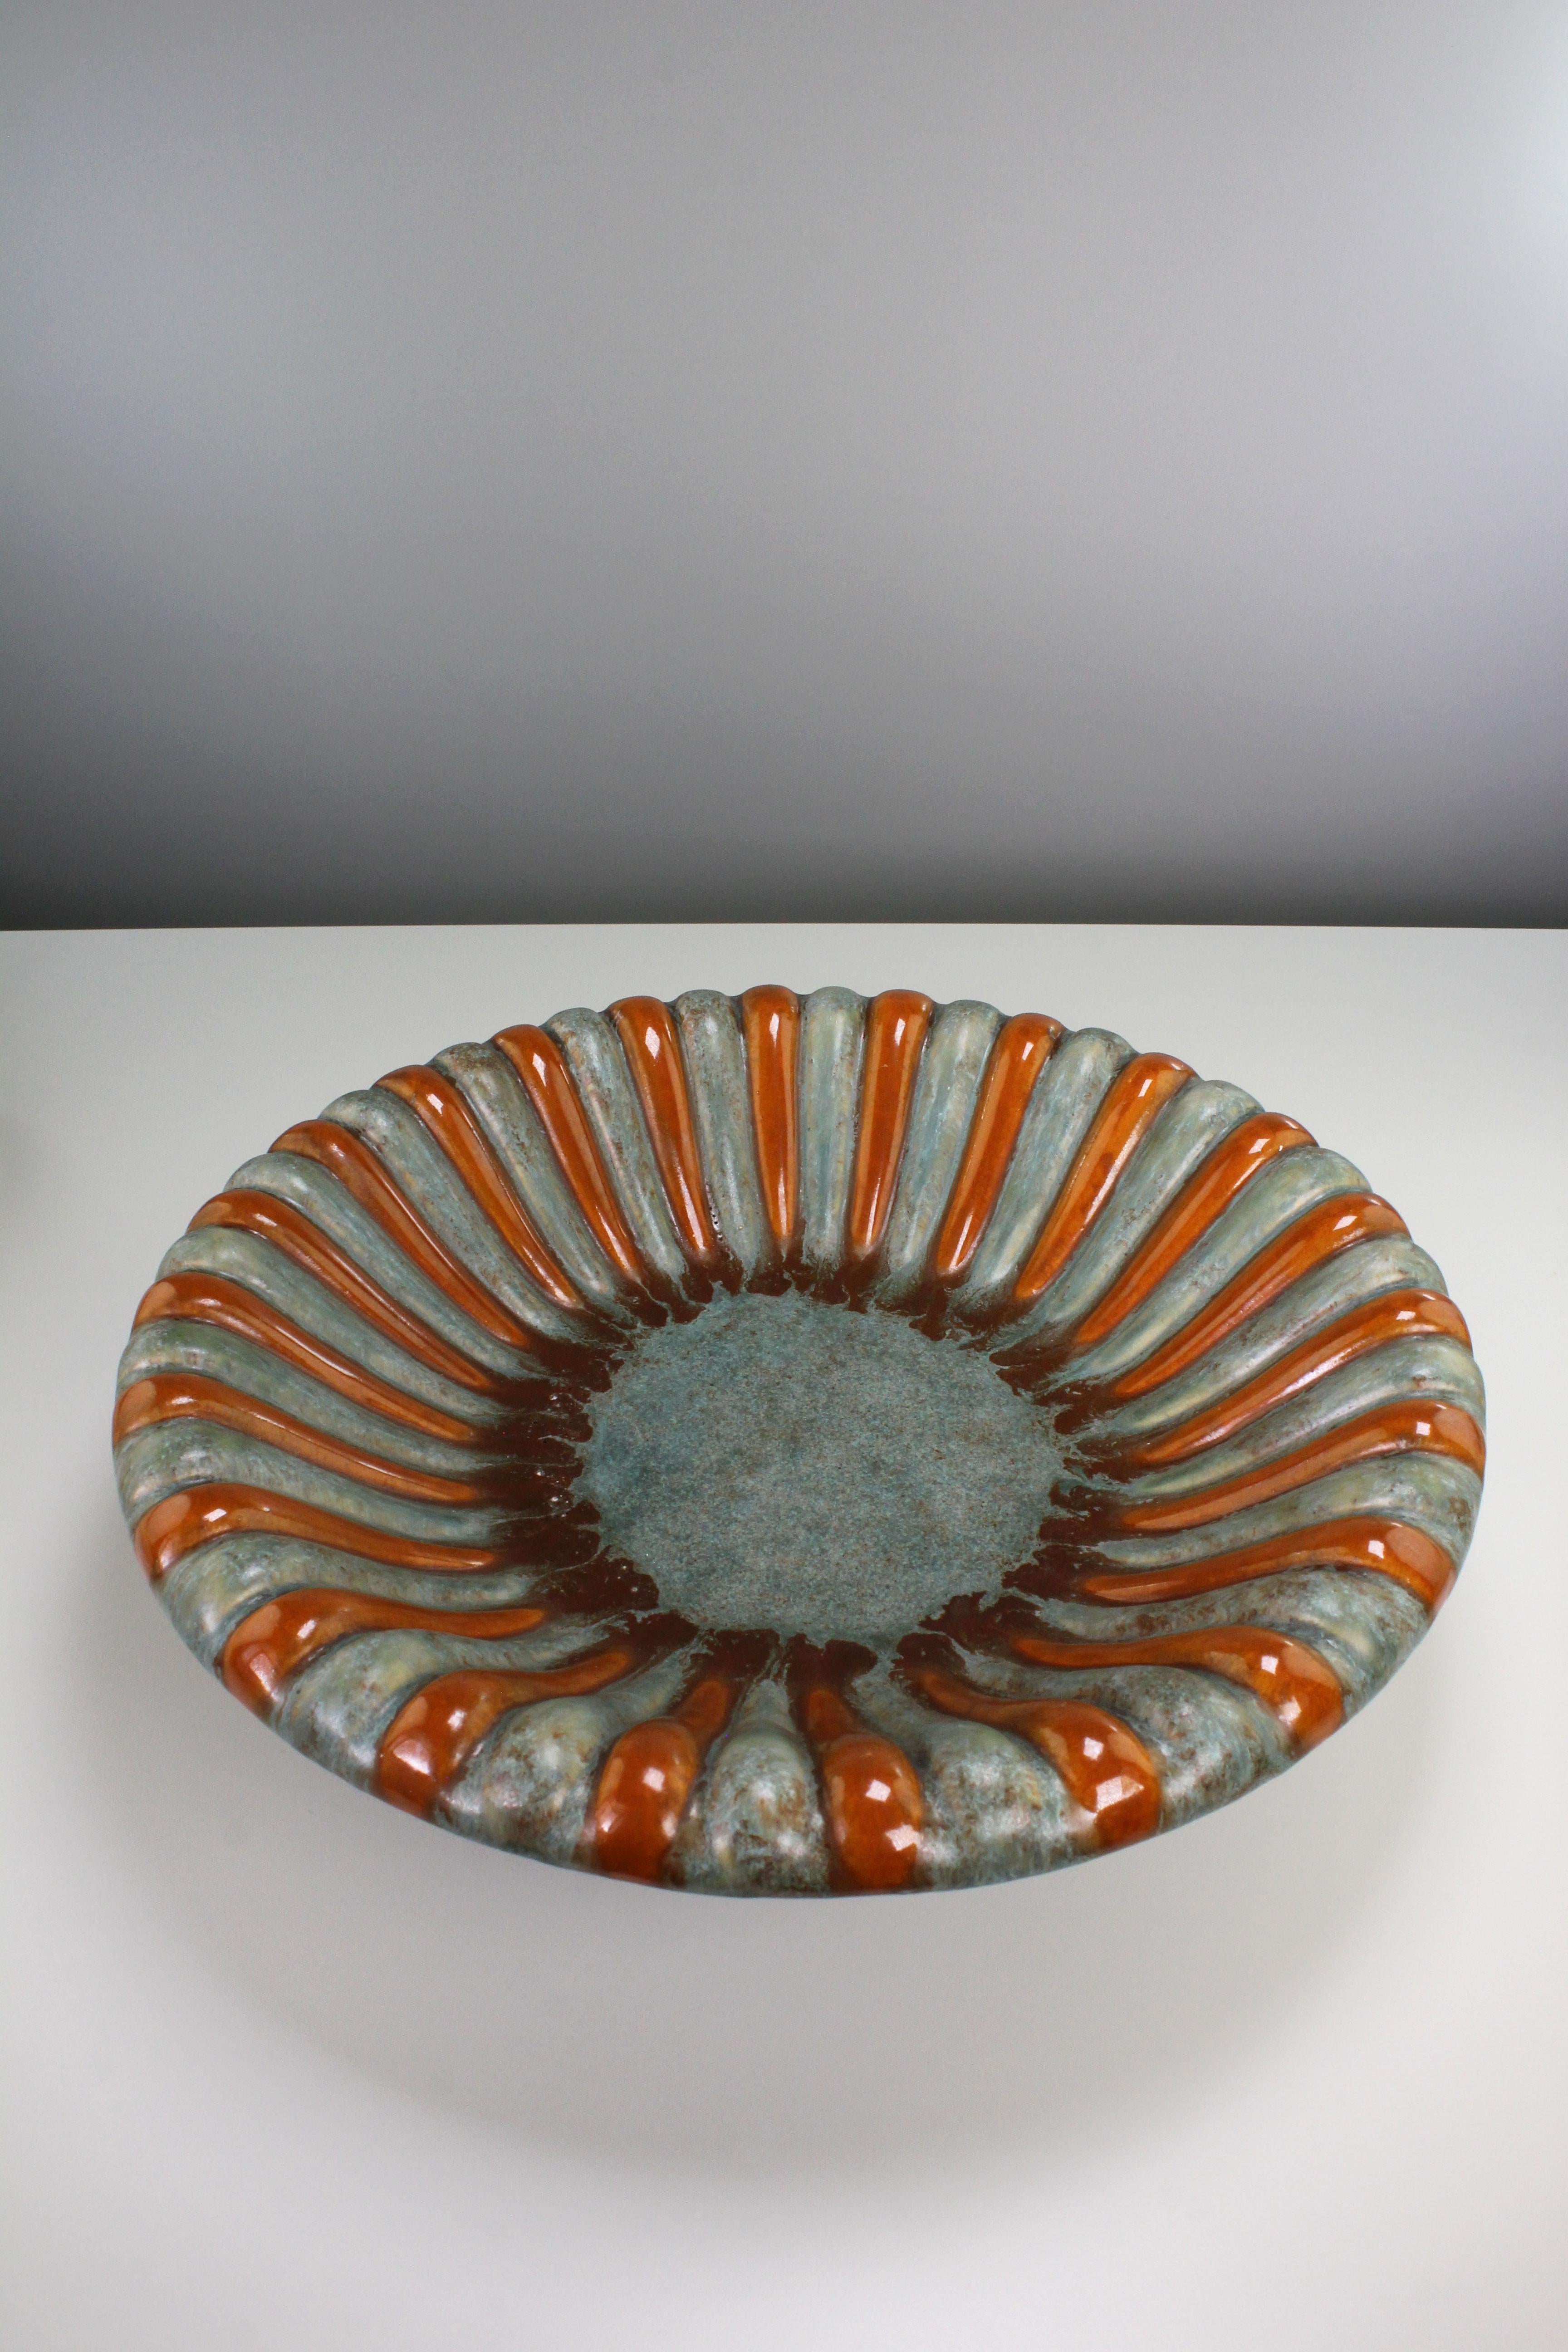 Striking Danish Art Deco handmade ceramic decorative bowl by Michael Andersen & Son. Vibrant orange, umber and seafoam green glaze over relief wave-like striped pattern from centre to edge. Manufactured on the island of Bornholm in the early 1940s.